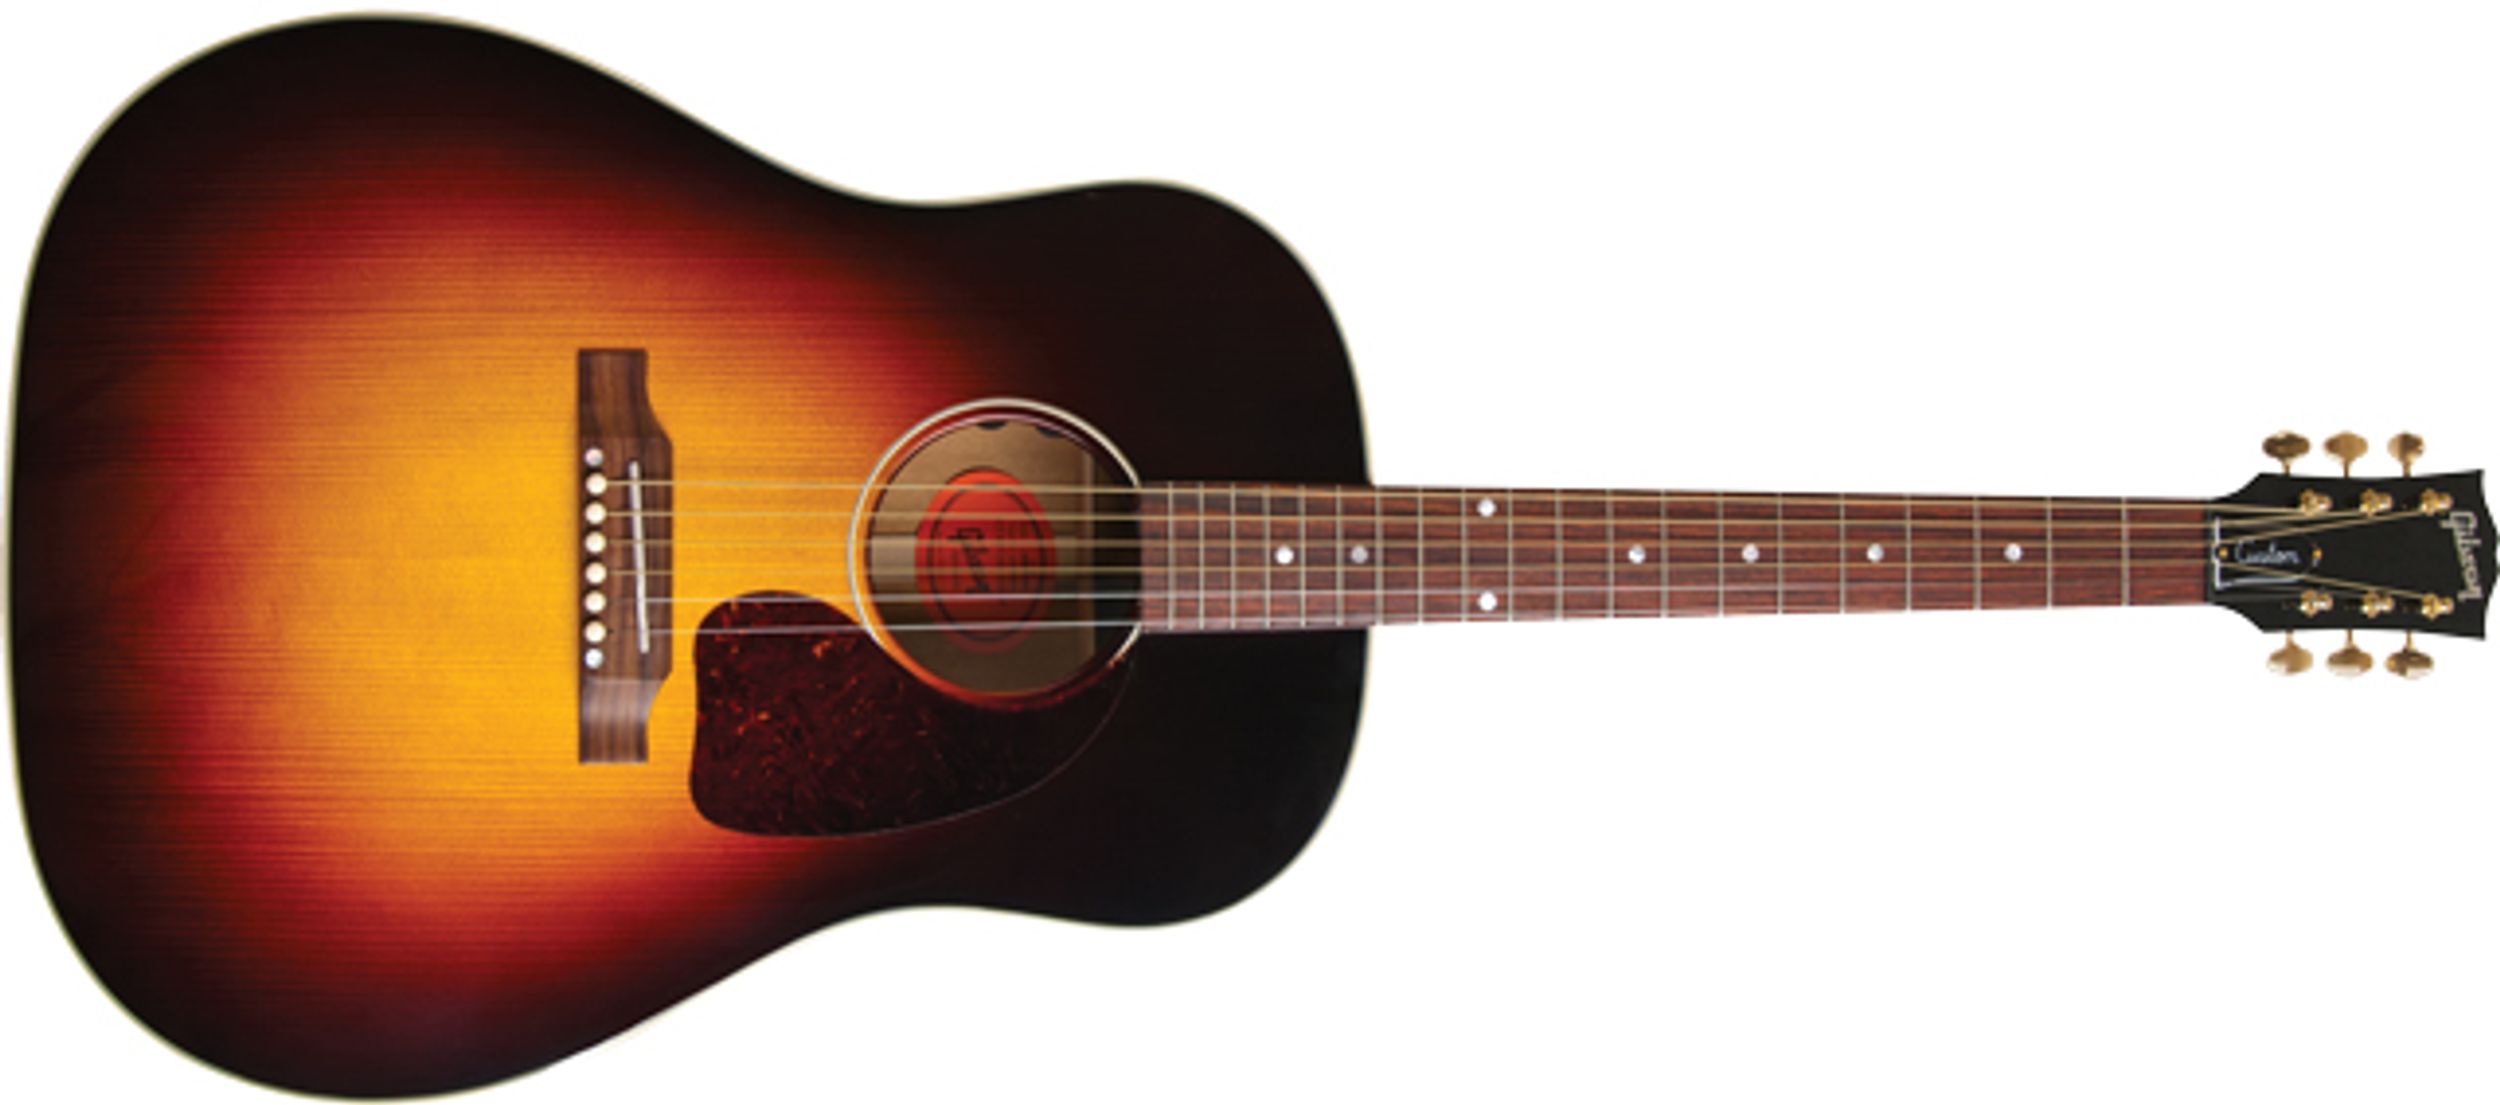 Gibson J-45 Purevoice Custom Limited Edition Acoustic Guitar Review